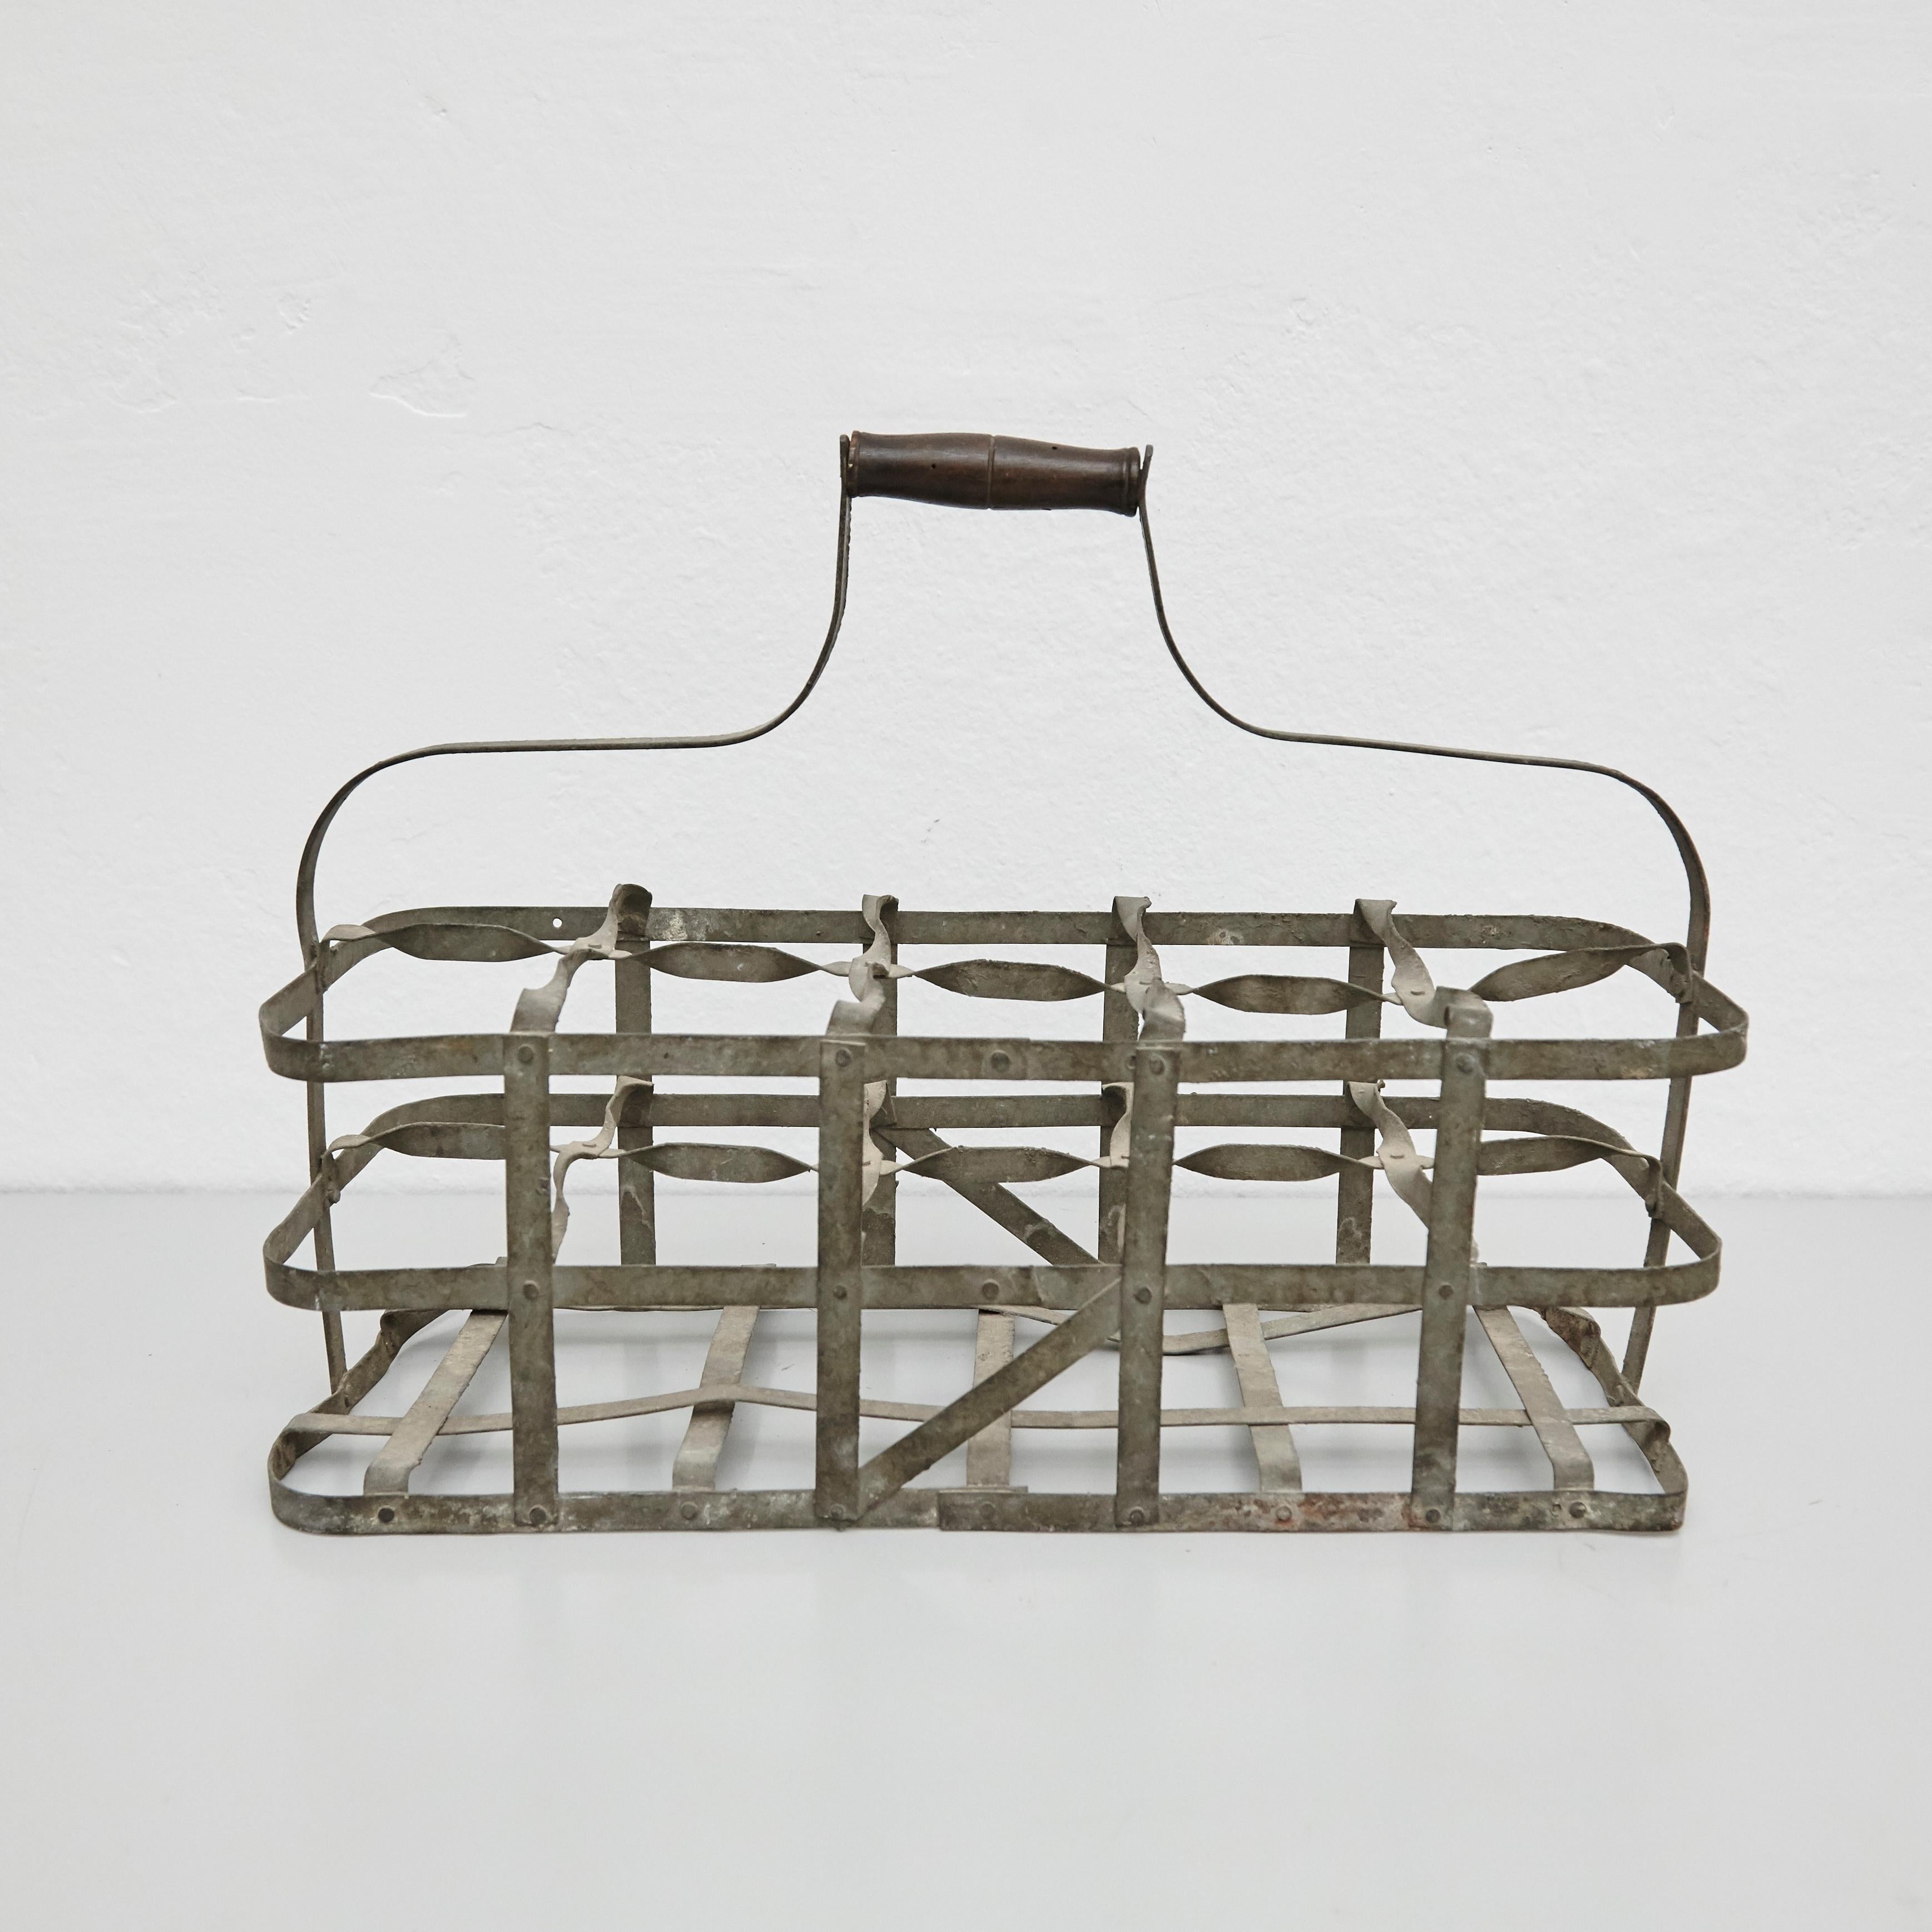 Early 20th Century French Rustic Wood and Metal Bottle Rack, circa 1920